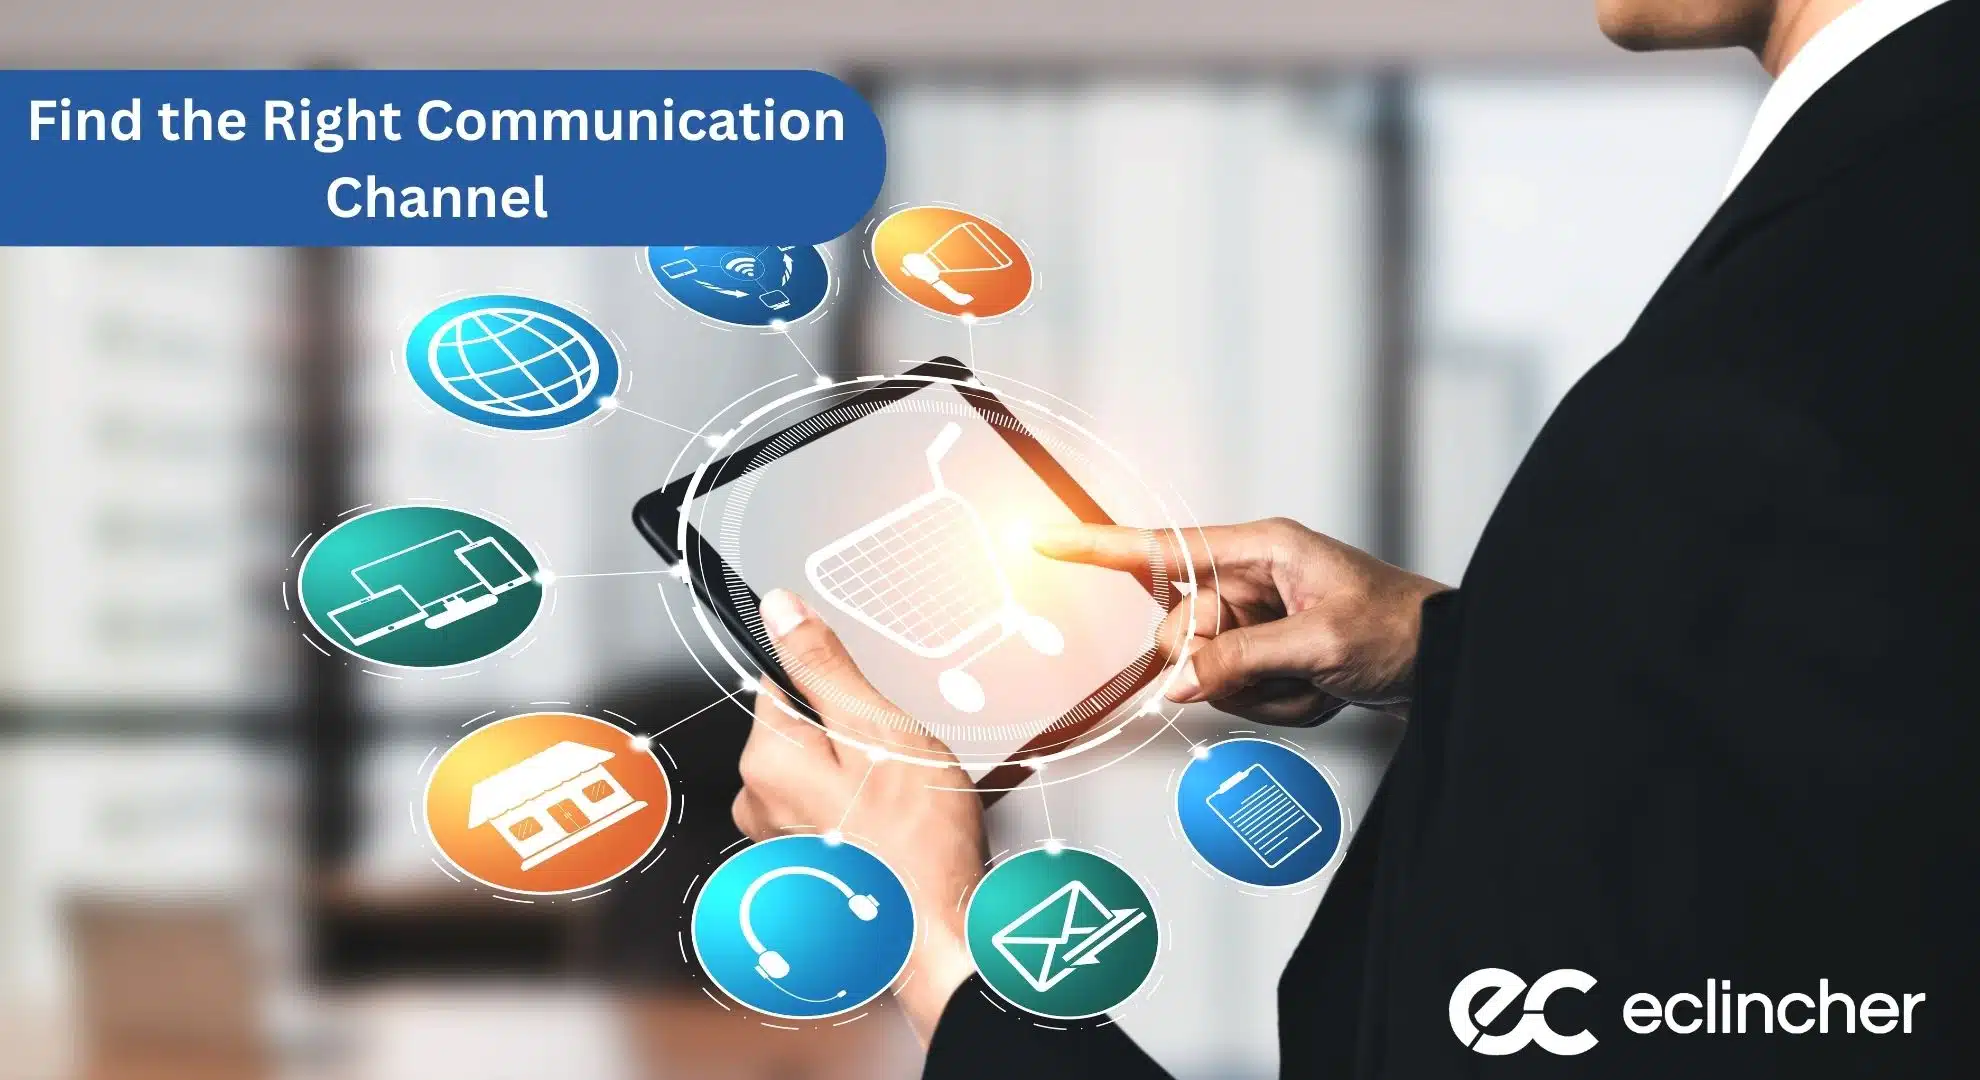 Find the Right Communication Channel